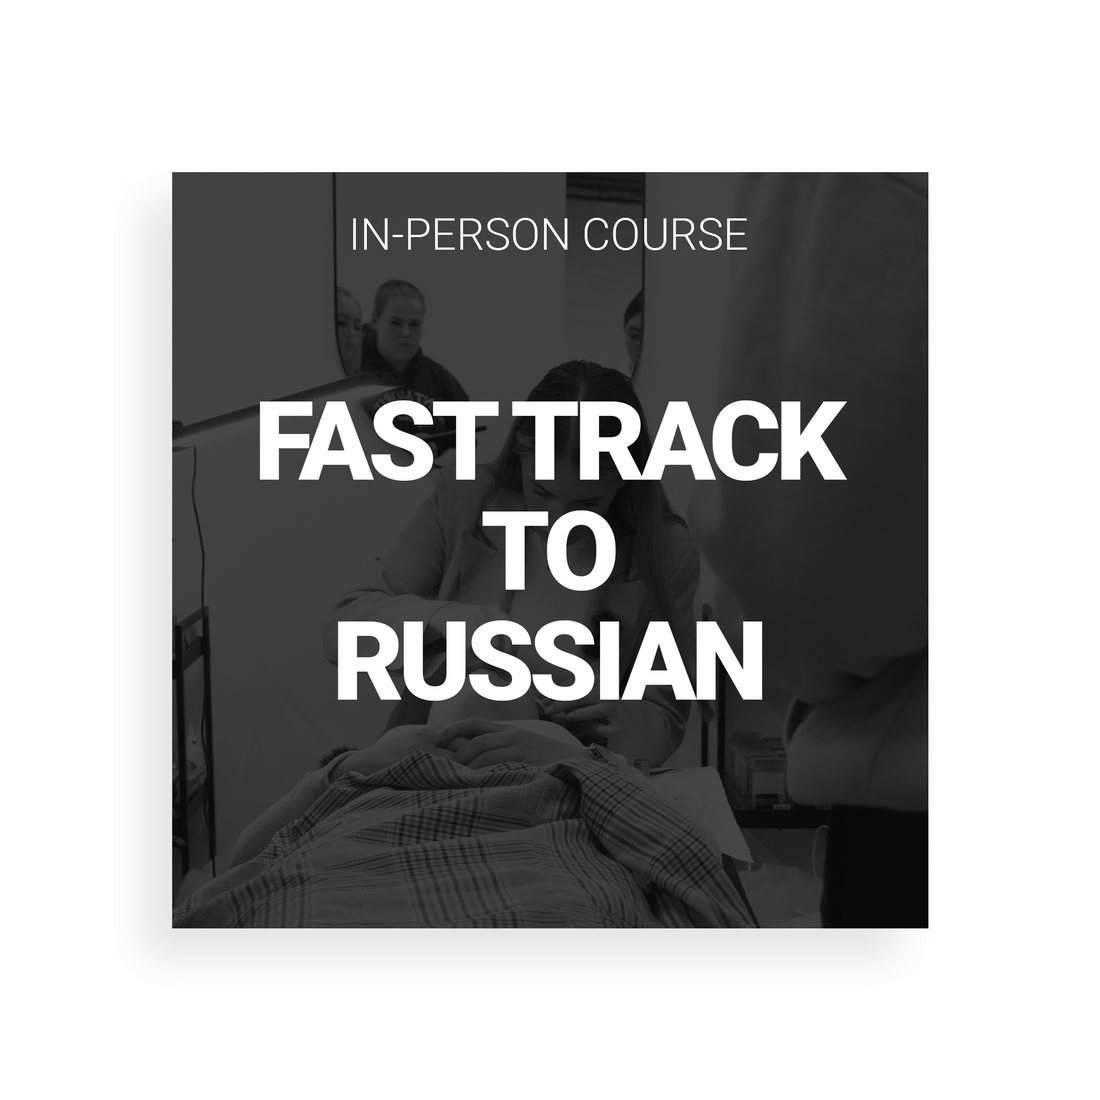 FAST TRACK TO RUSSIAN